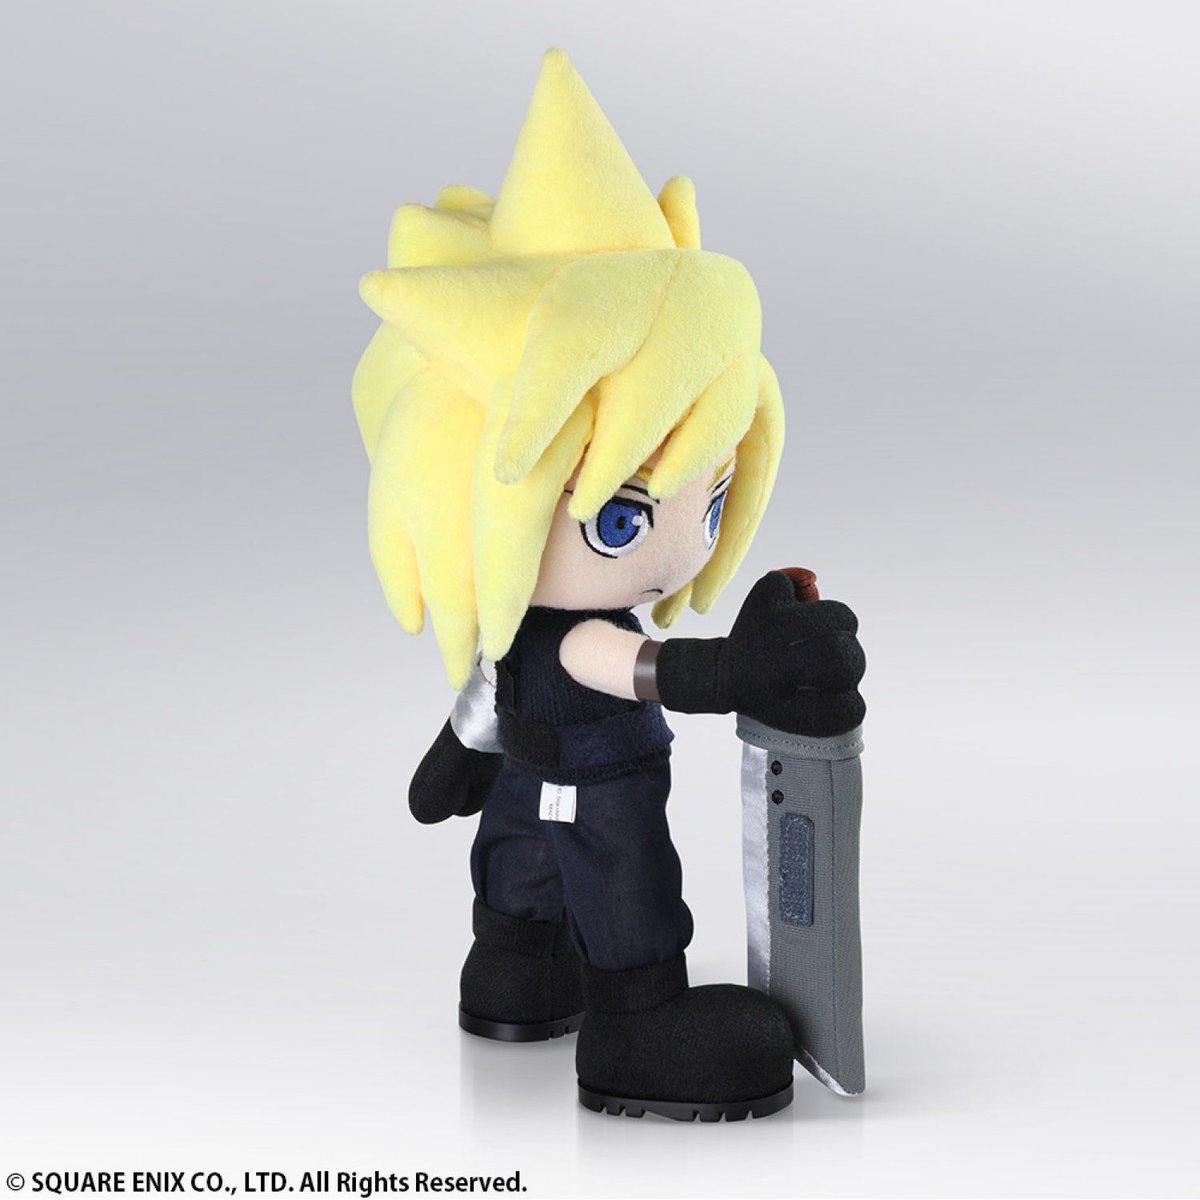 Nintendeal Ar Twitter Final Fantasy Vii Cloud Strife Action Plush Pre Order Play Asia T Co Apsi2ov8ja 58 99 With Coupon Code Ndeal Amazon T Co H3mv3xveza 69 99 T Co Cwlzwfswmm